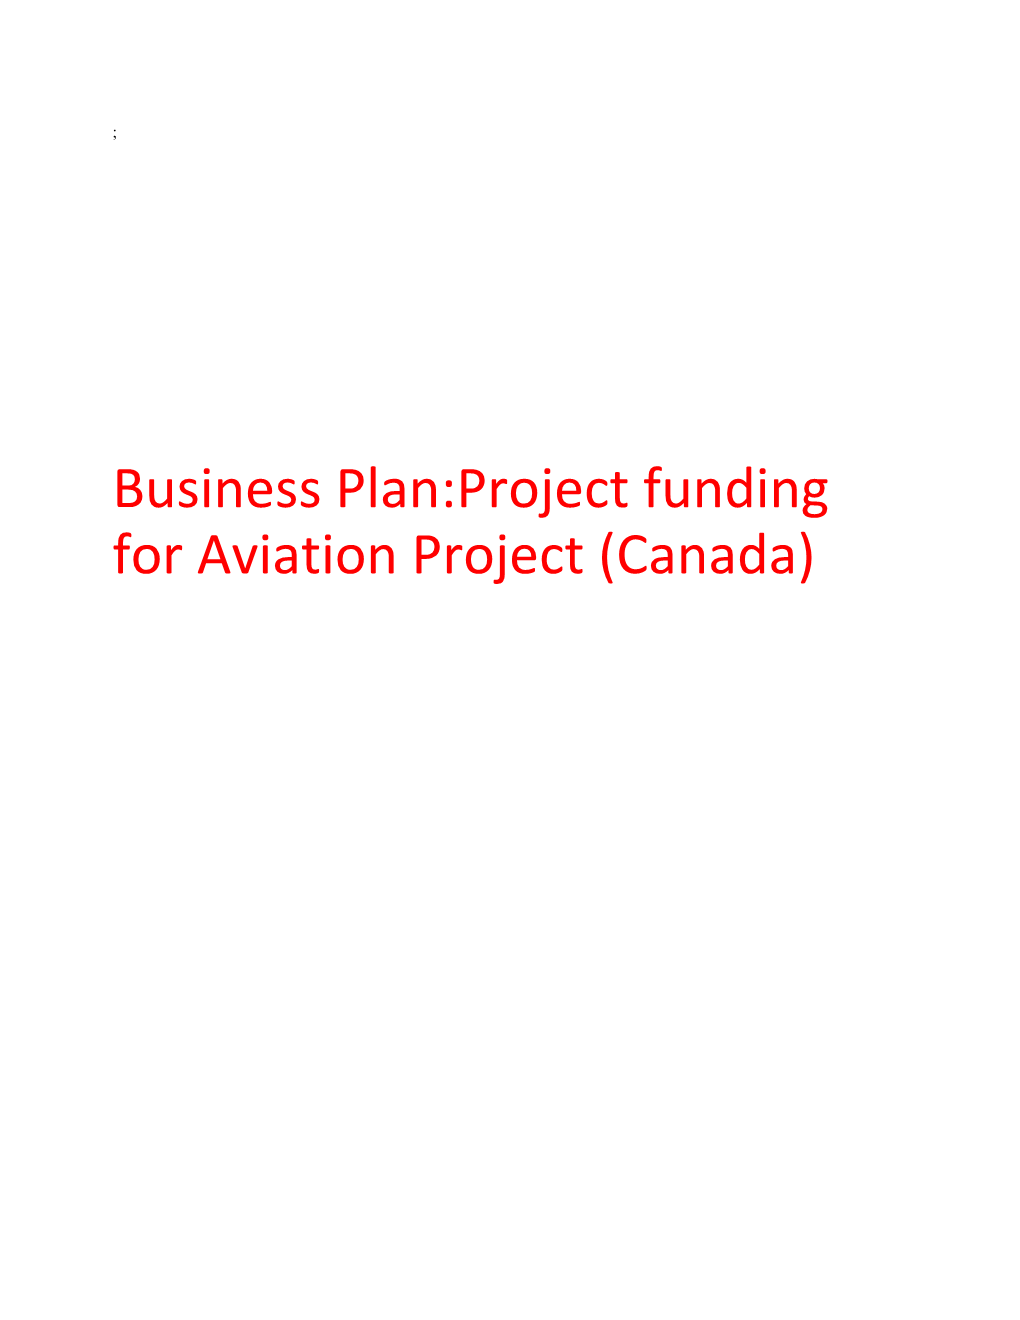 Business Plan:Project Funding for Aviation Project (Canada)